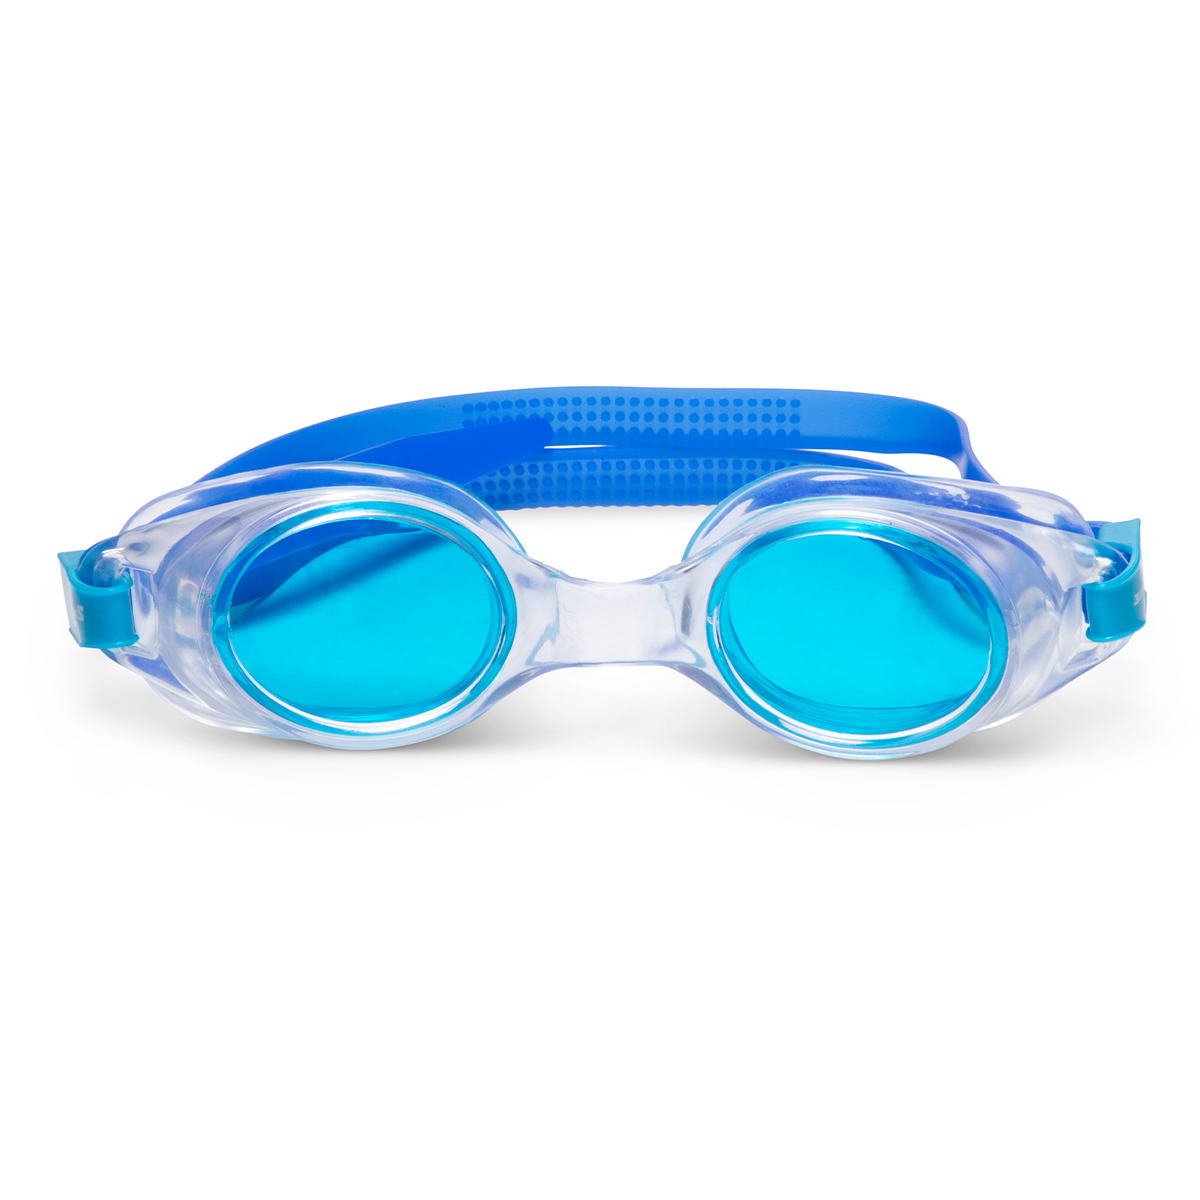 Blue fitness goggle